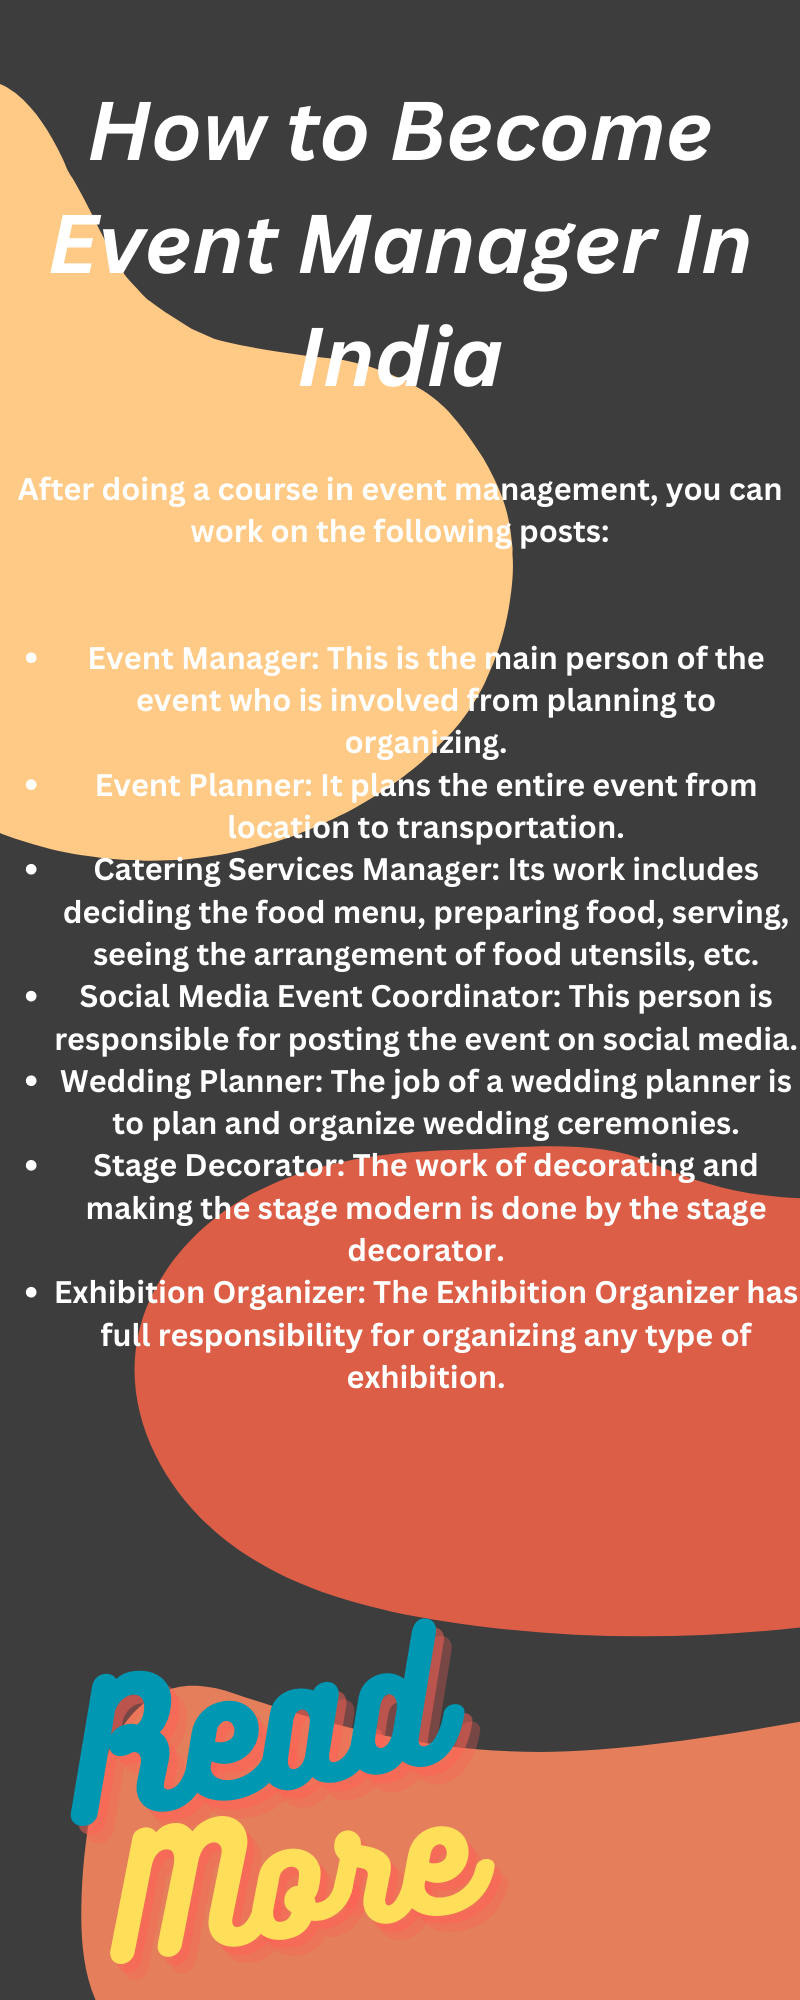 How to Become Event Manager In India